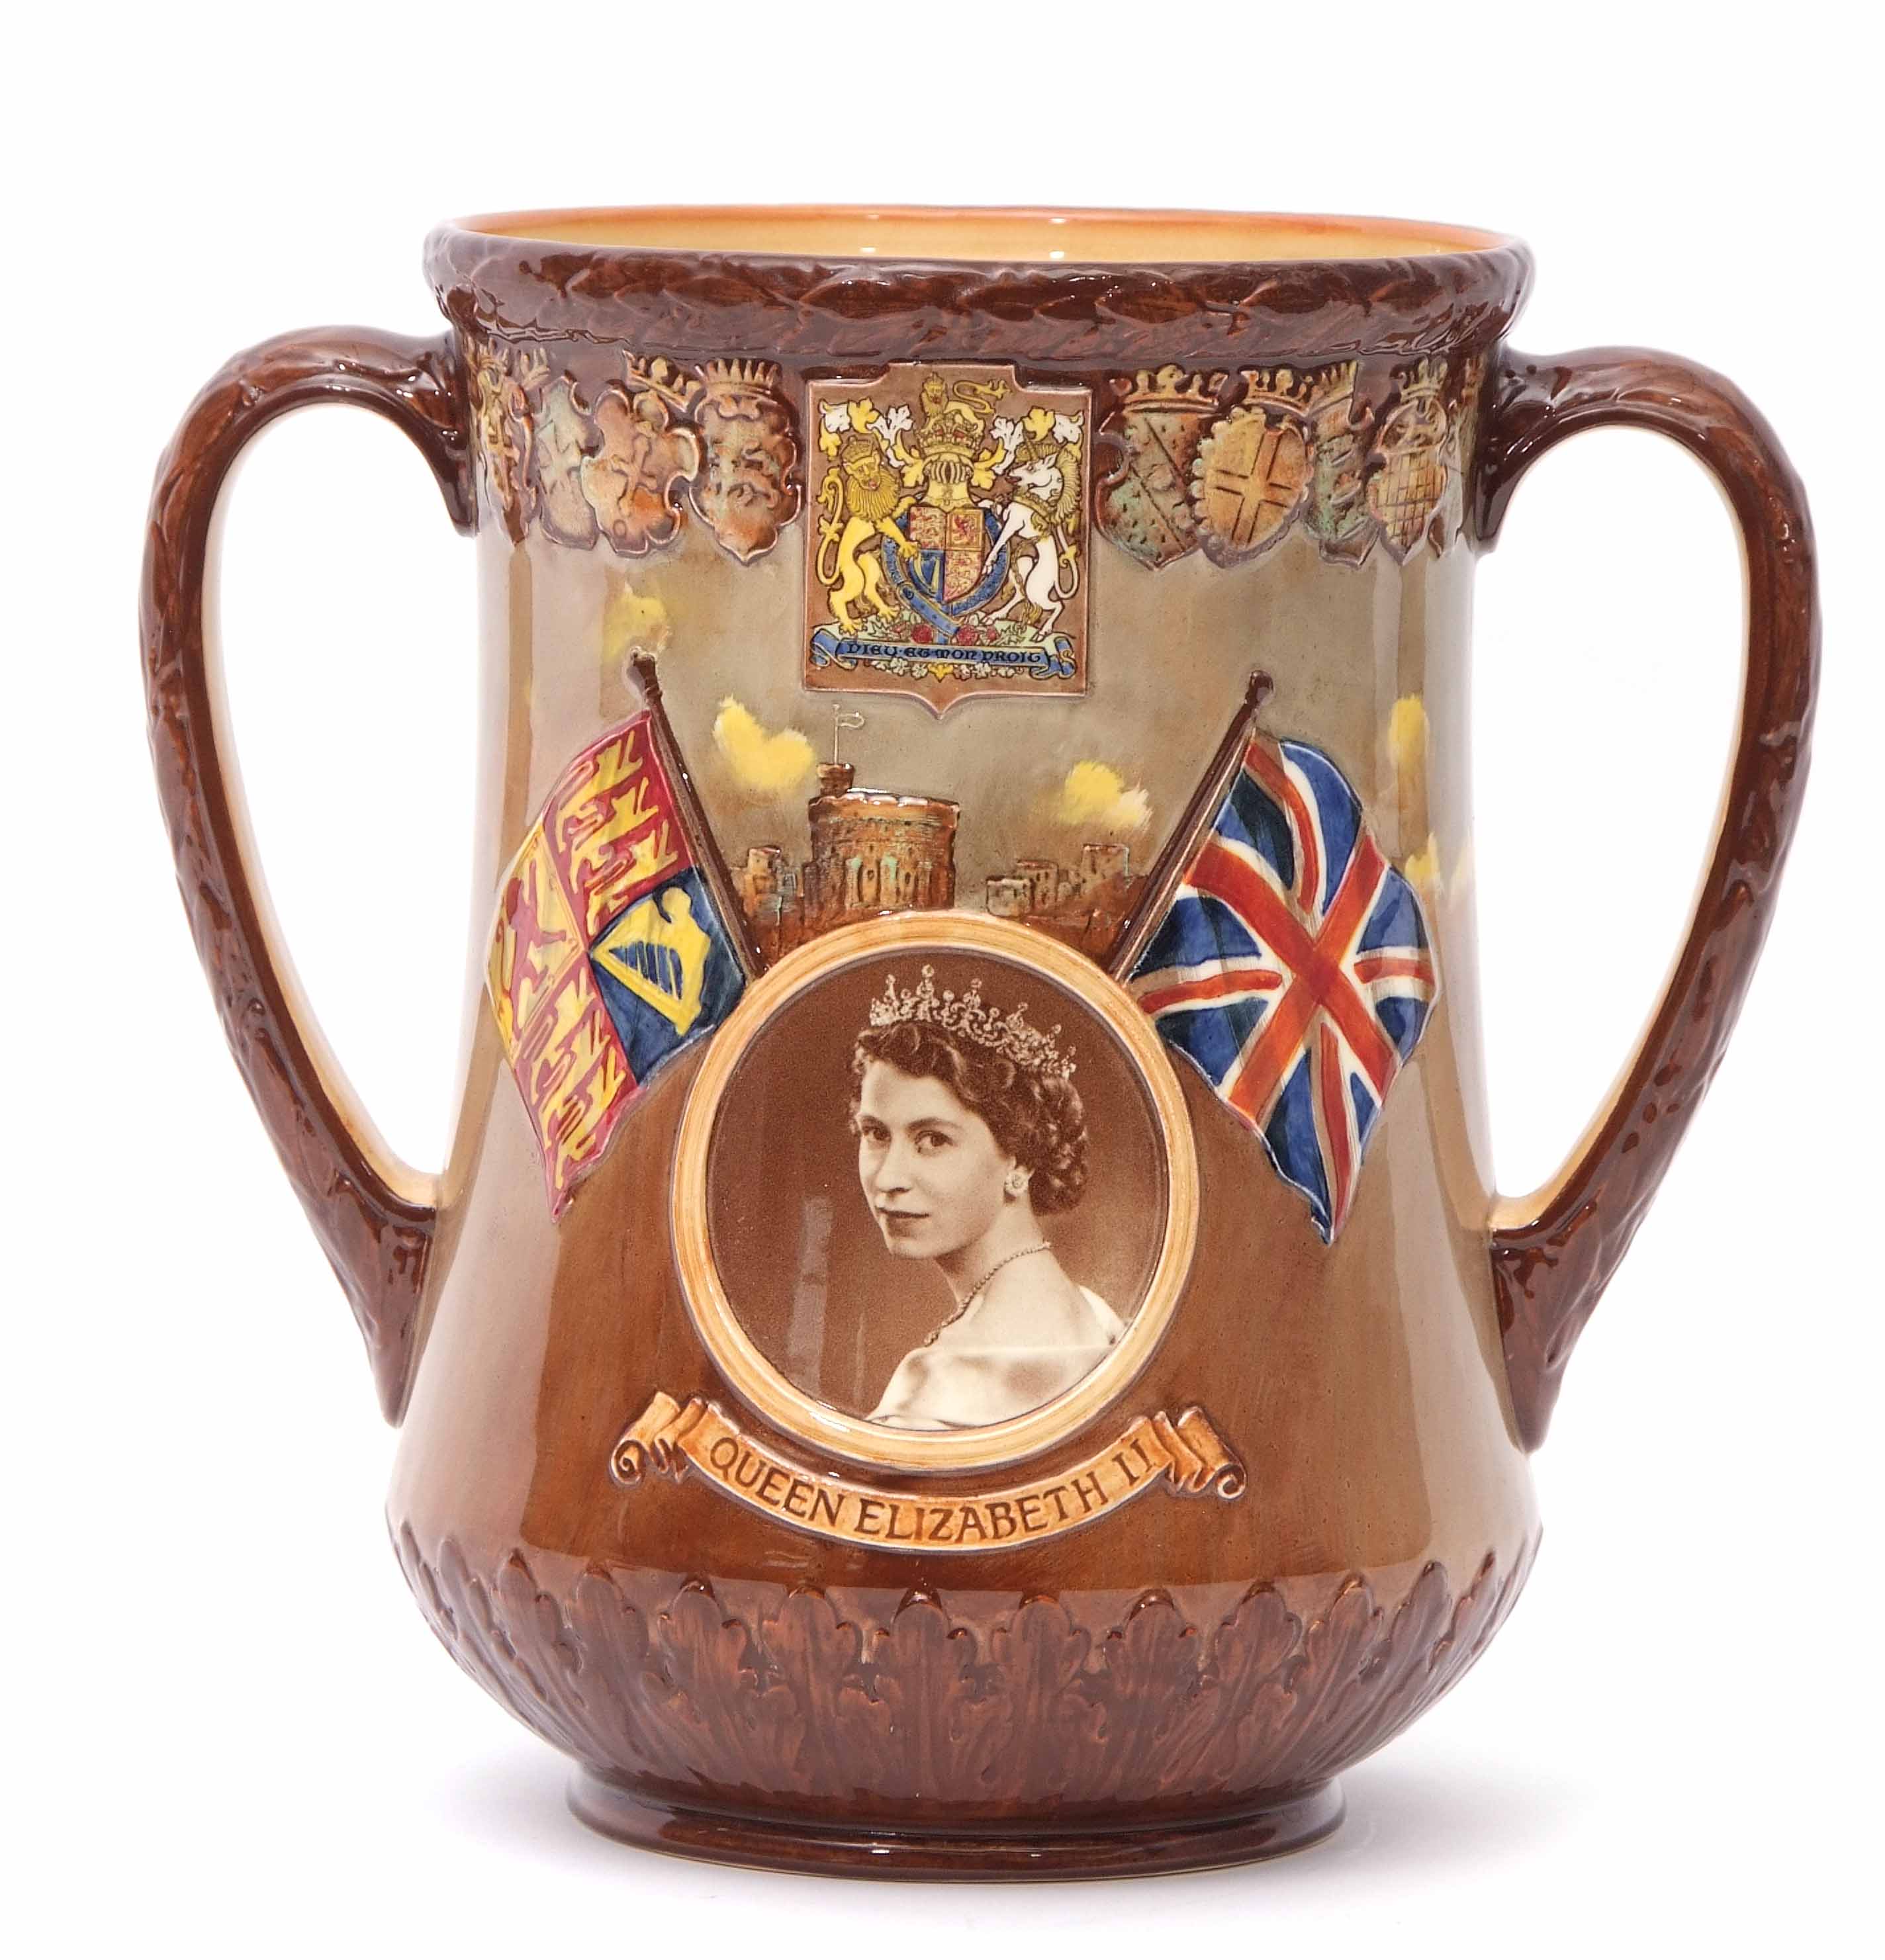 Royal Doulton limited edition loving cup to commemorate the Coronation of Queen Elizabeth II, the